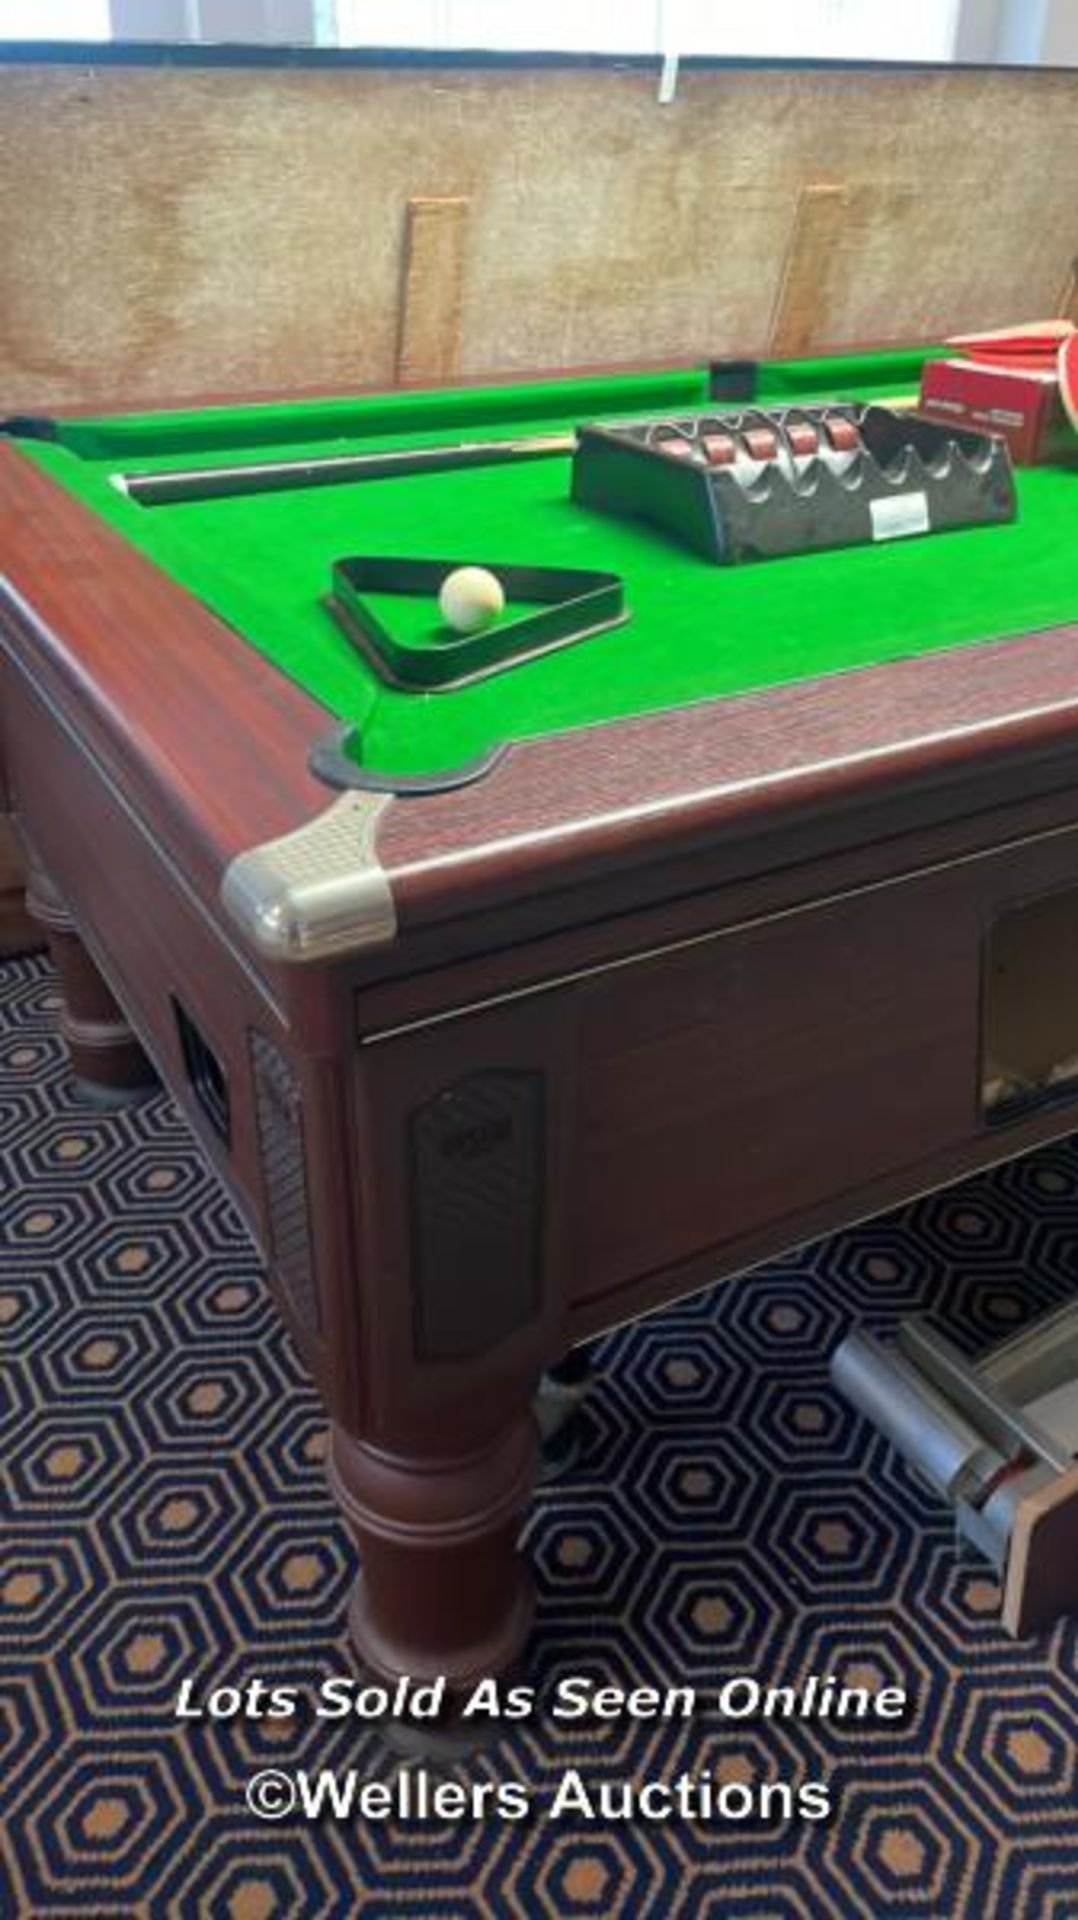 SUPREME POOL STANDARD SIZED POOL TABLE, RECENTLY REFELTED, INCLUDES BALLS, LIGHT, WALL MOUNTED CUE - Image 3 of 8